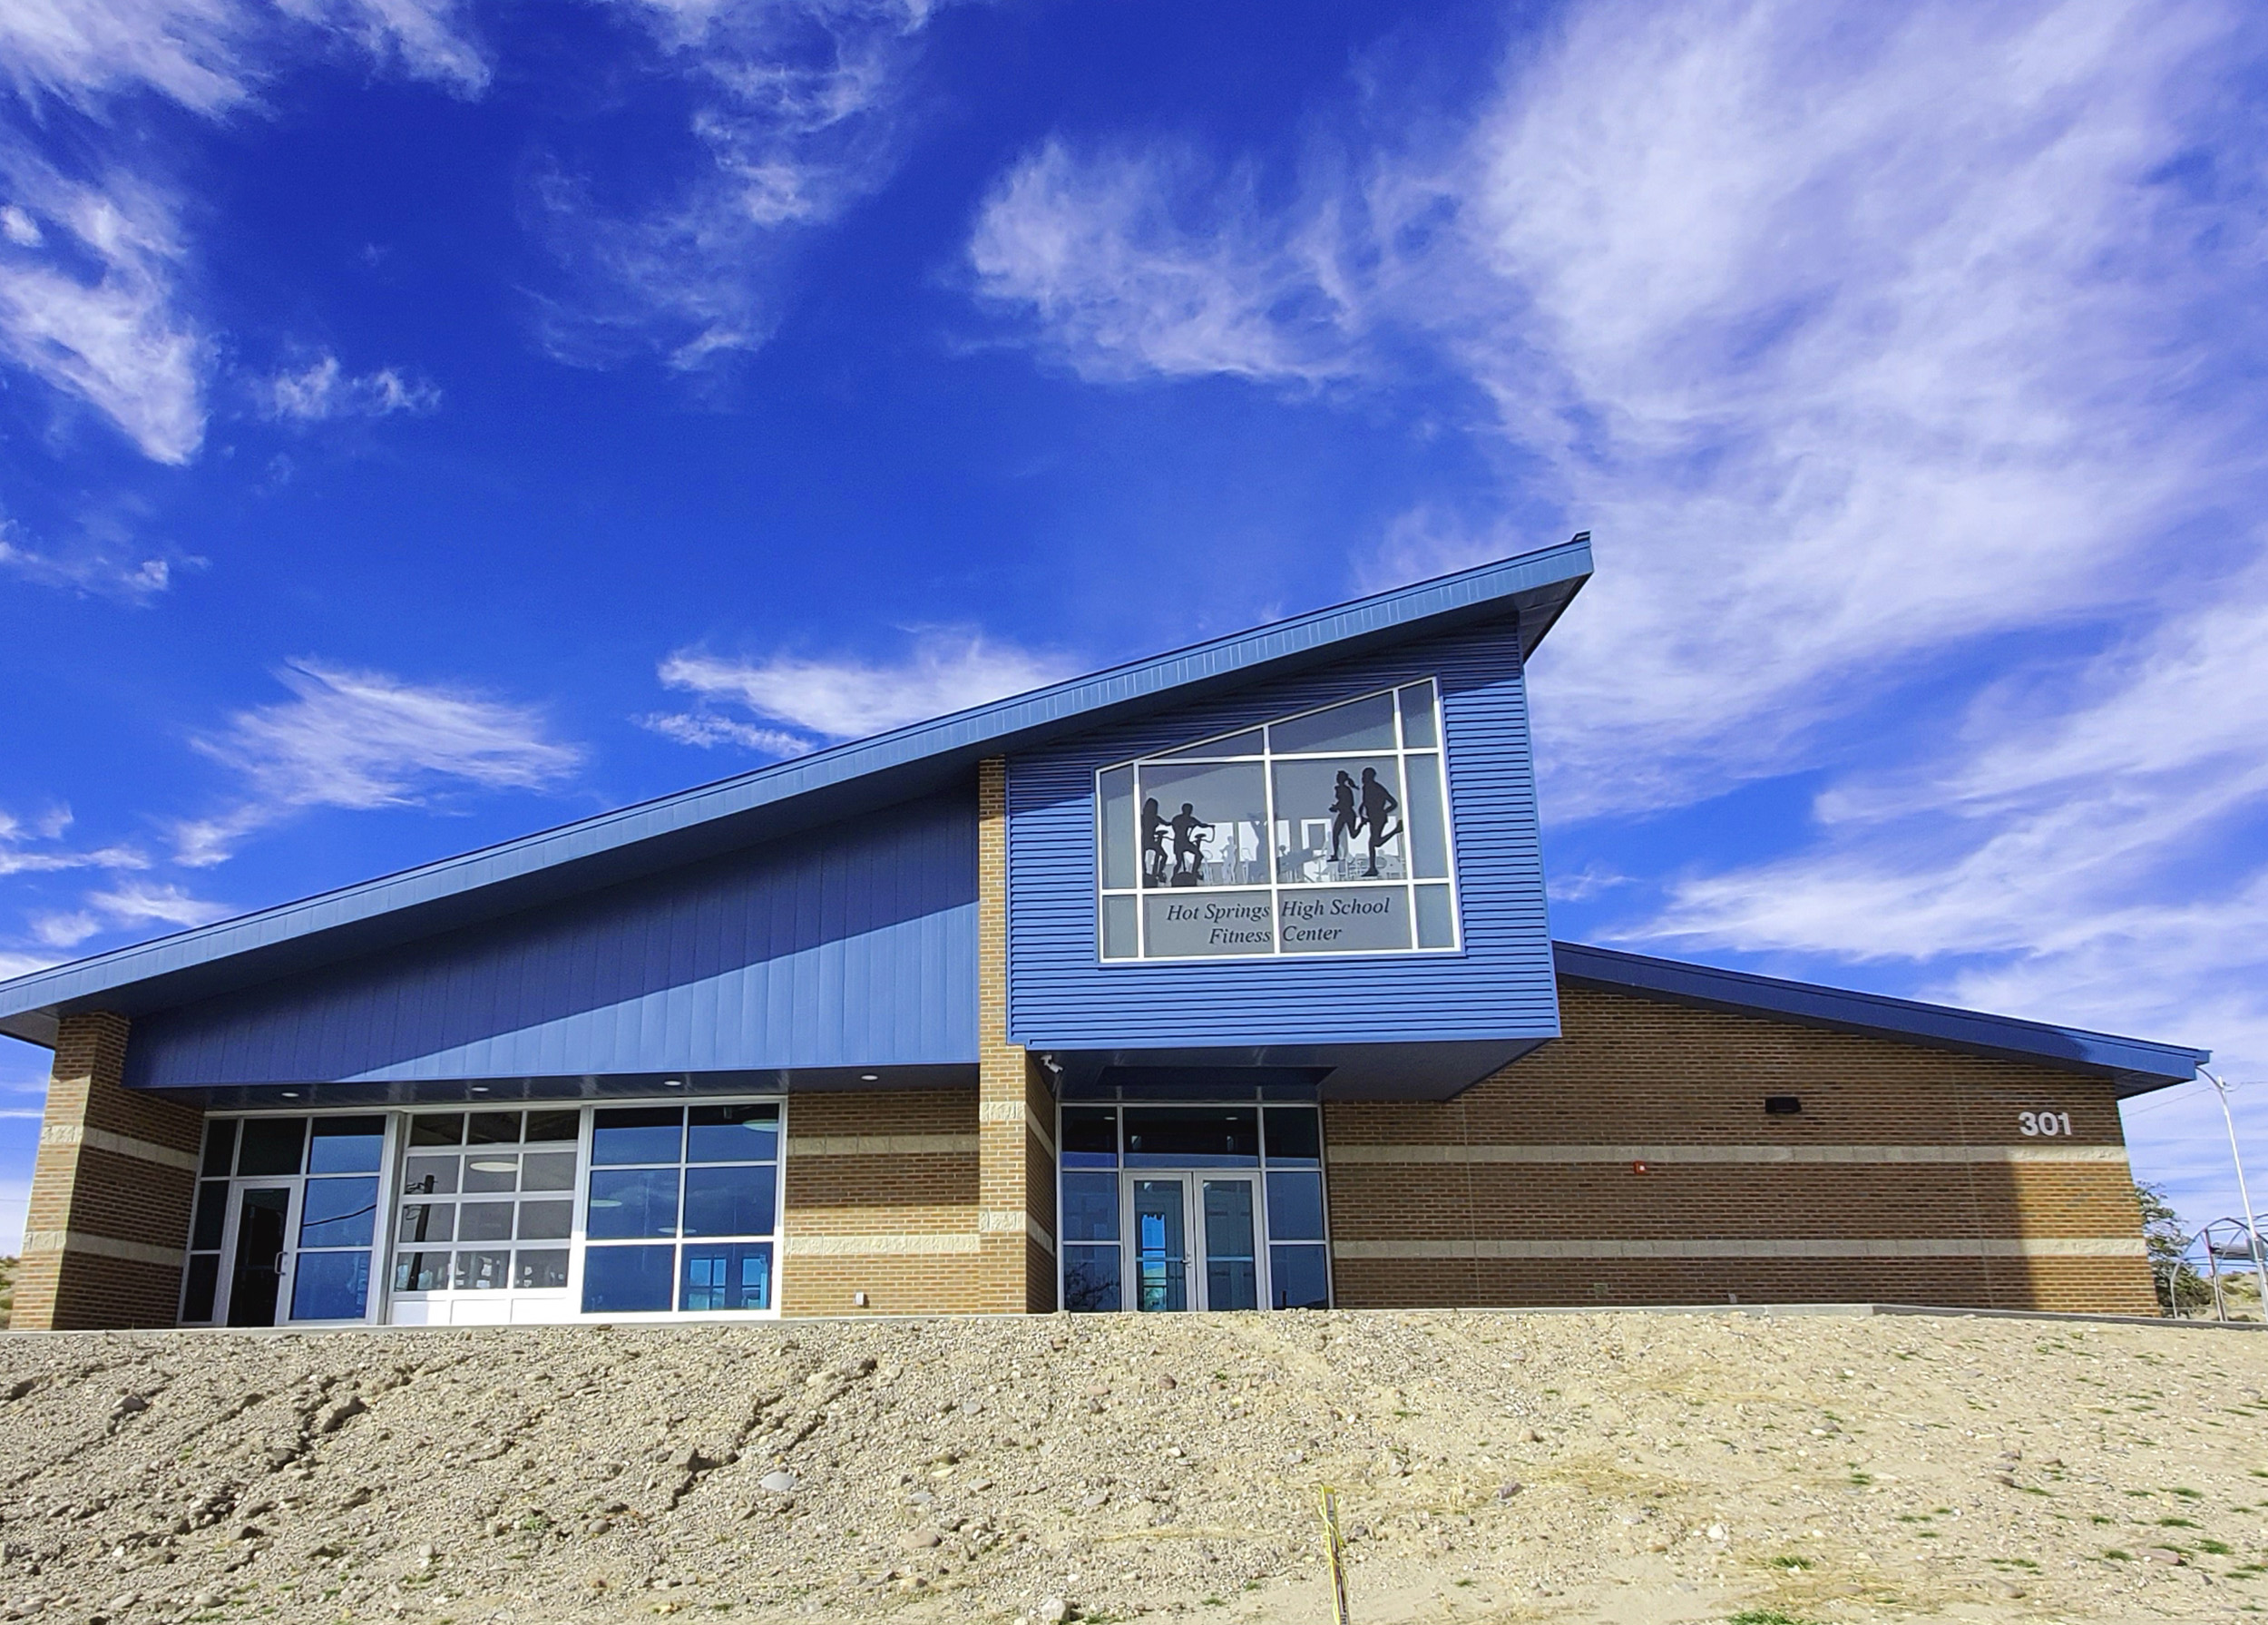 The Hot Springs High School Fitness Center serves the needs of community students and first responders in Truth or Consequences, NM.